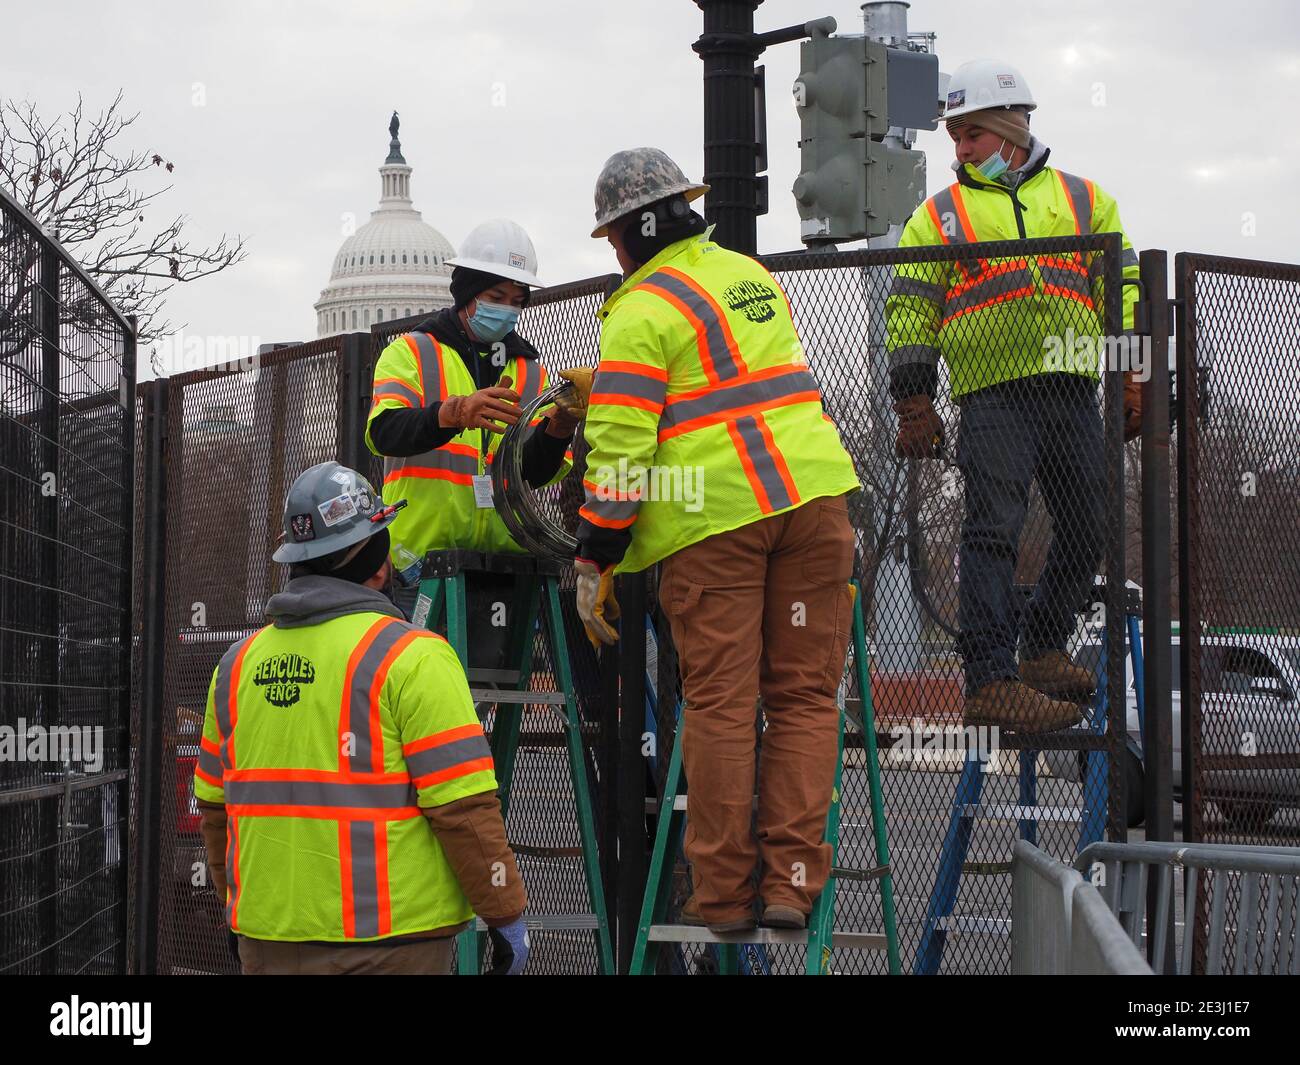 January 18, 2021, Washington, District of Columbia, USA: Workers string concertina wire atop fences to prevent entry into areas surround the U.S. Capitol and other federal buildings in advance of the inaugural events. (Credit Image: © Sue Dorfman/ZUMA Wire) Stock Photo